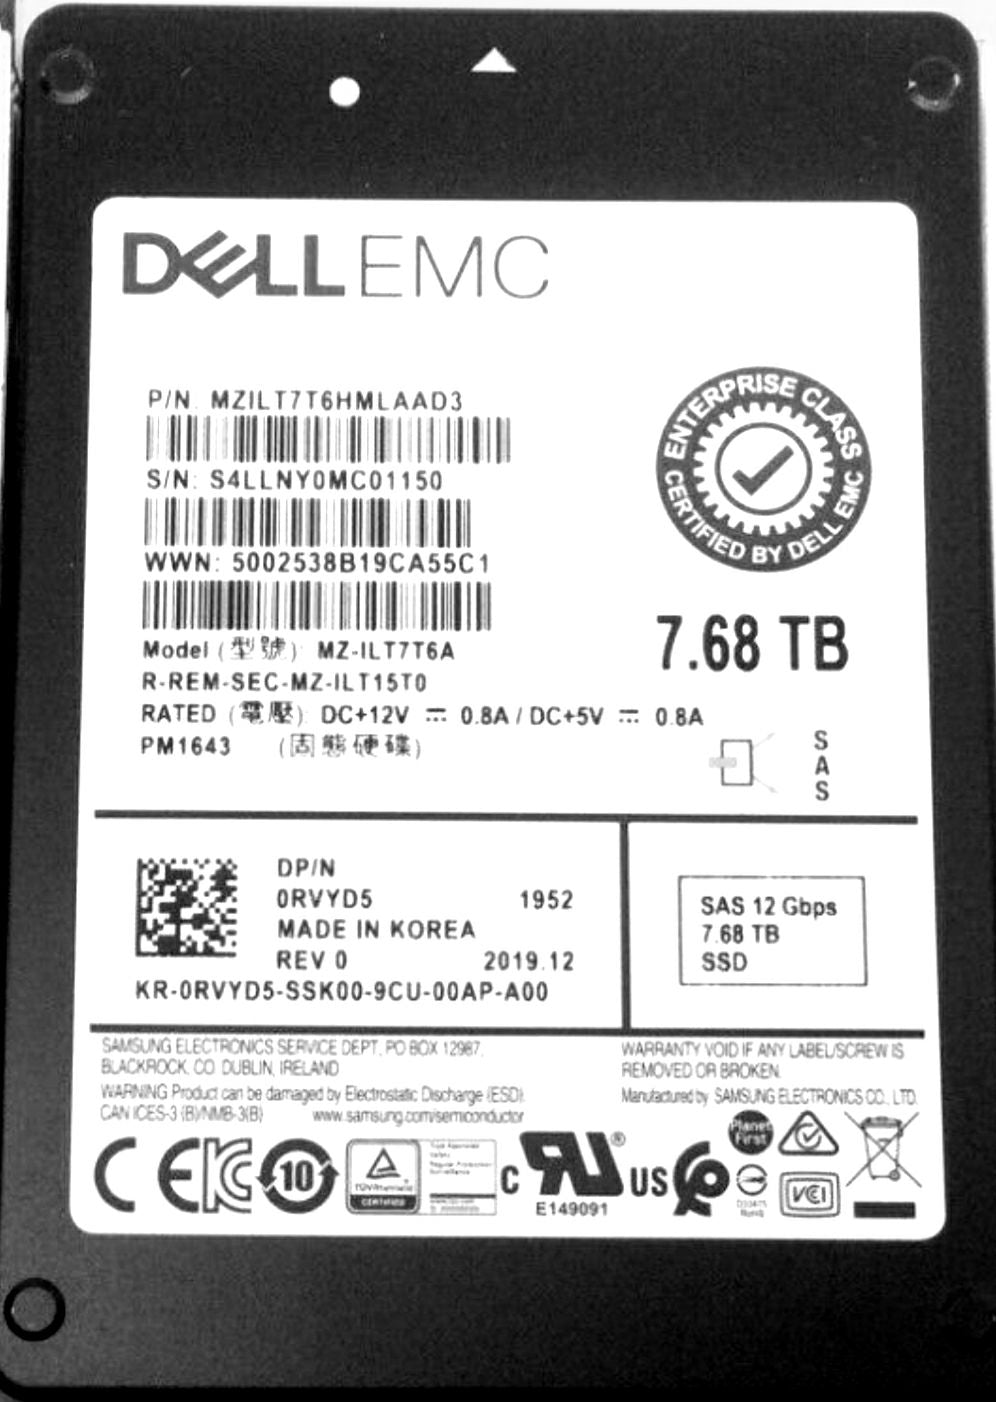 Samsung 7.68 TB PM1643 Solid state drive - 2.5